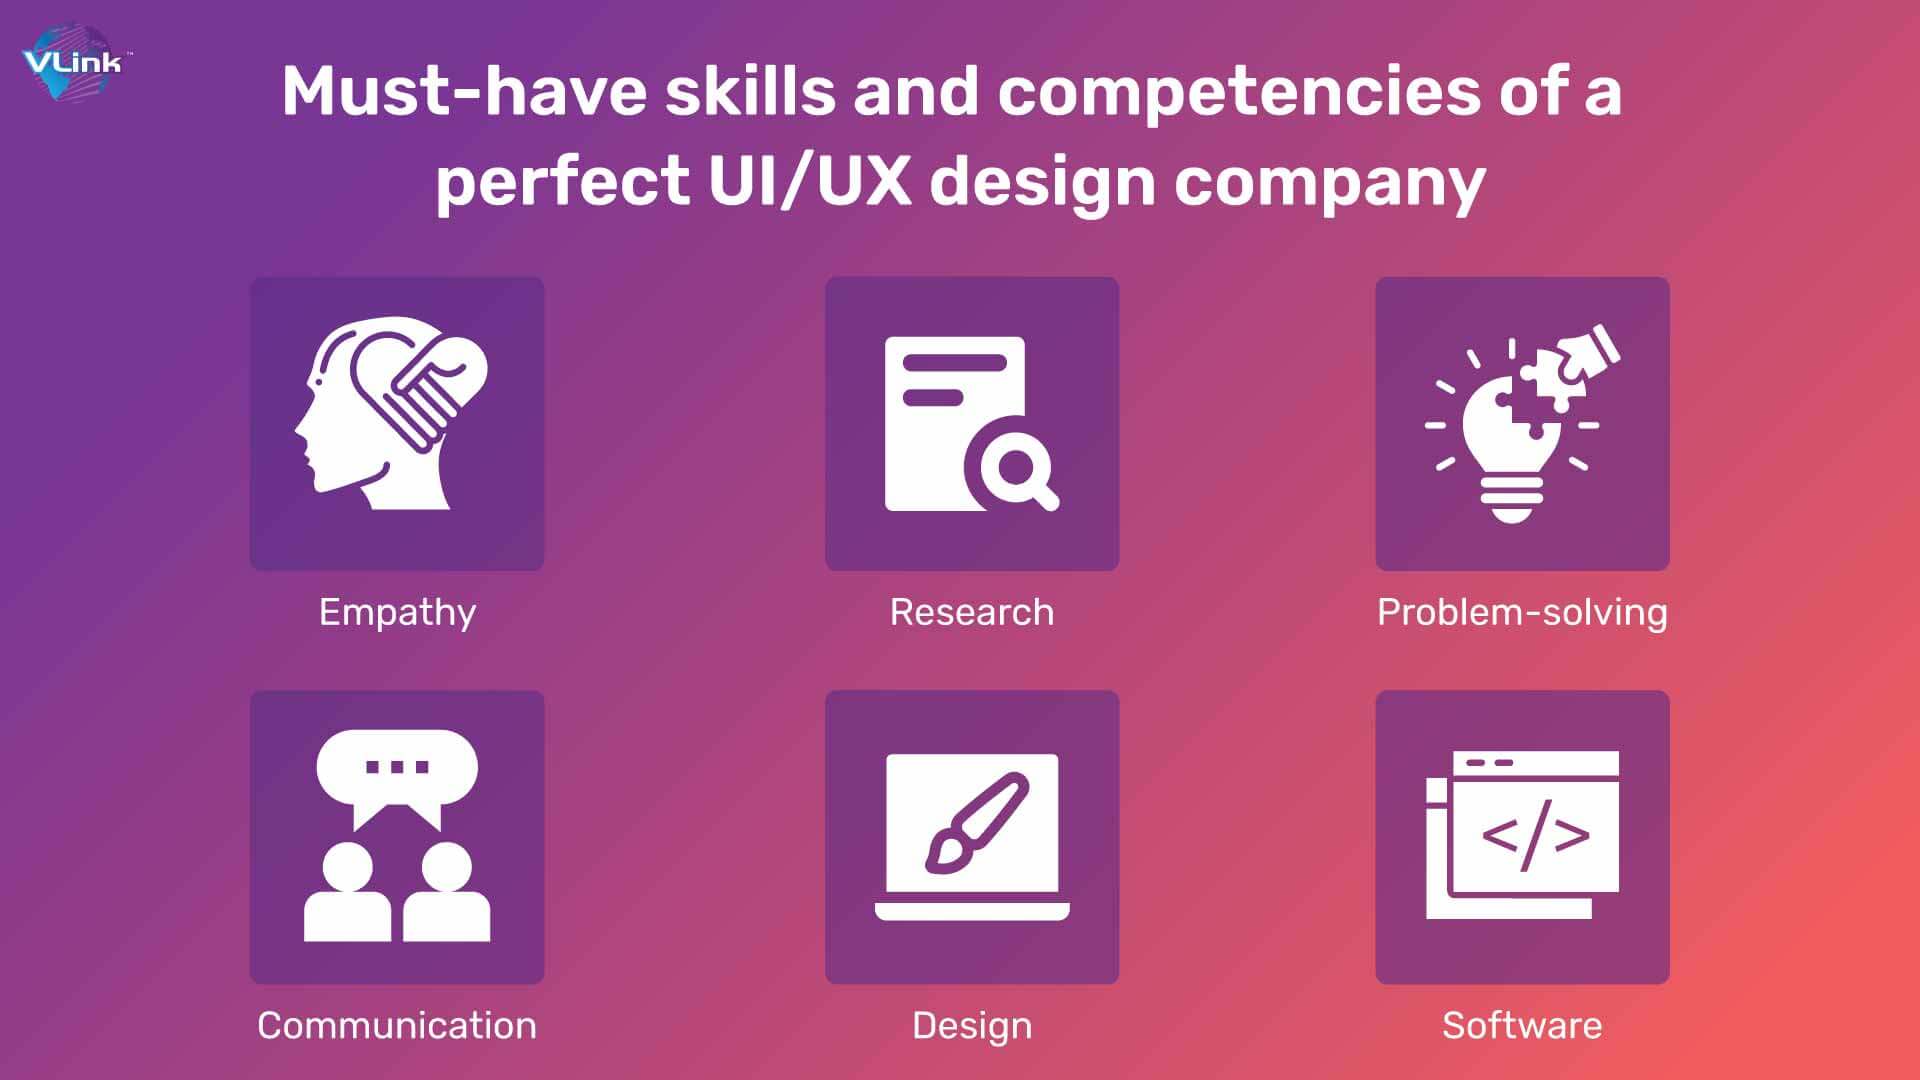 Must-have skills and competencies of a perfect UIUX design company